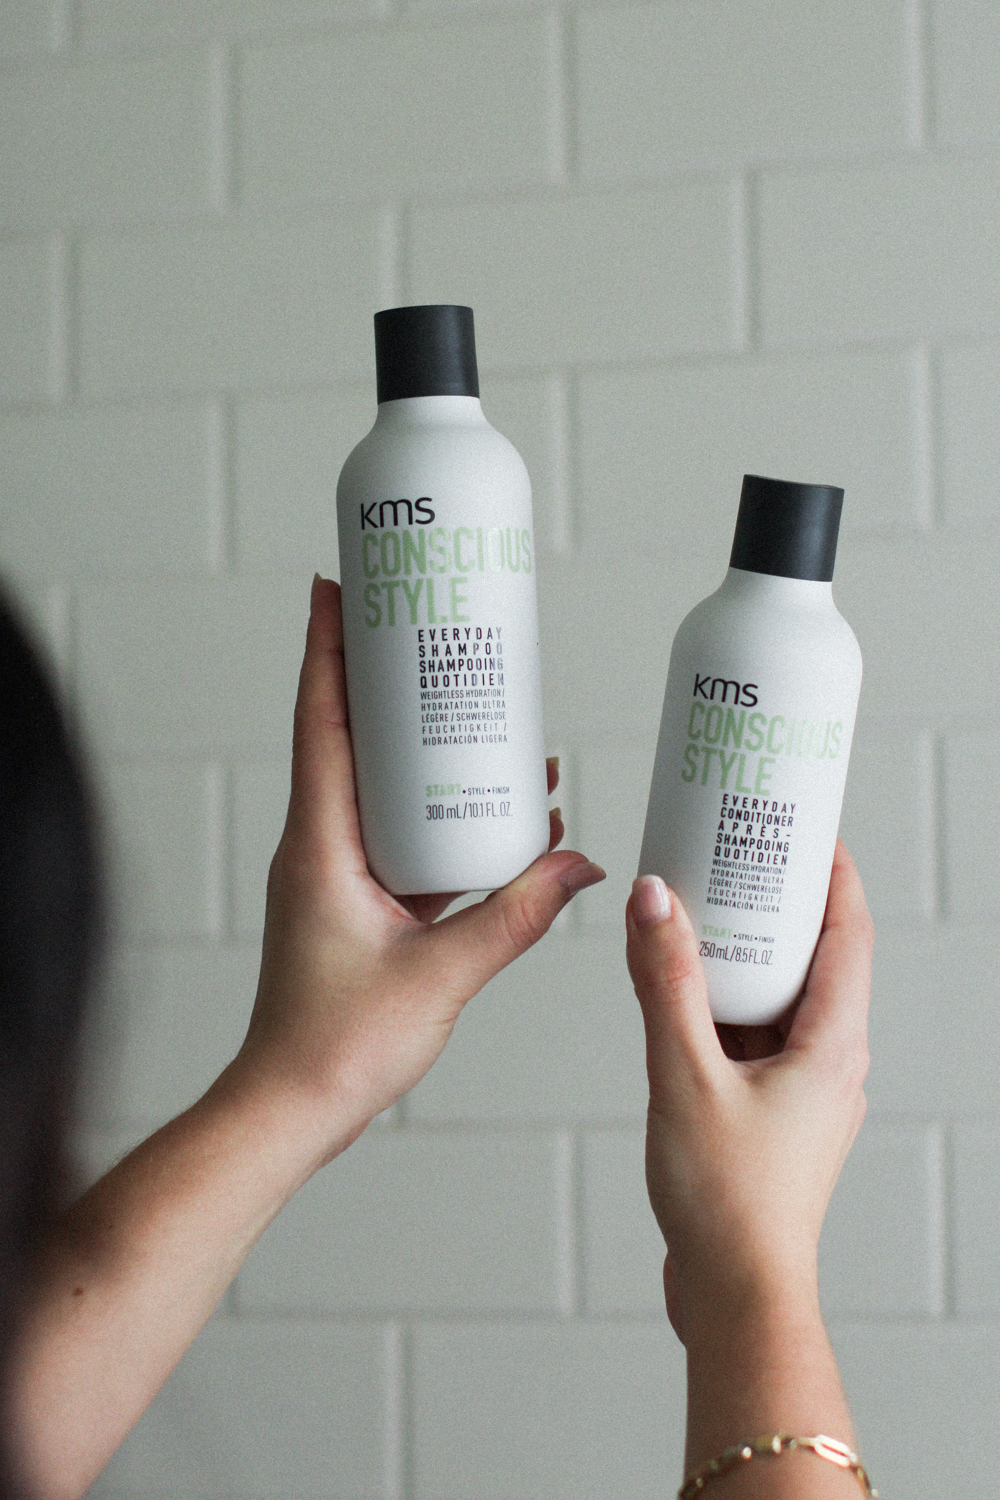 KMS ConsciousStyle Shampoo and Conditioner Review